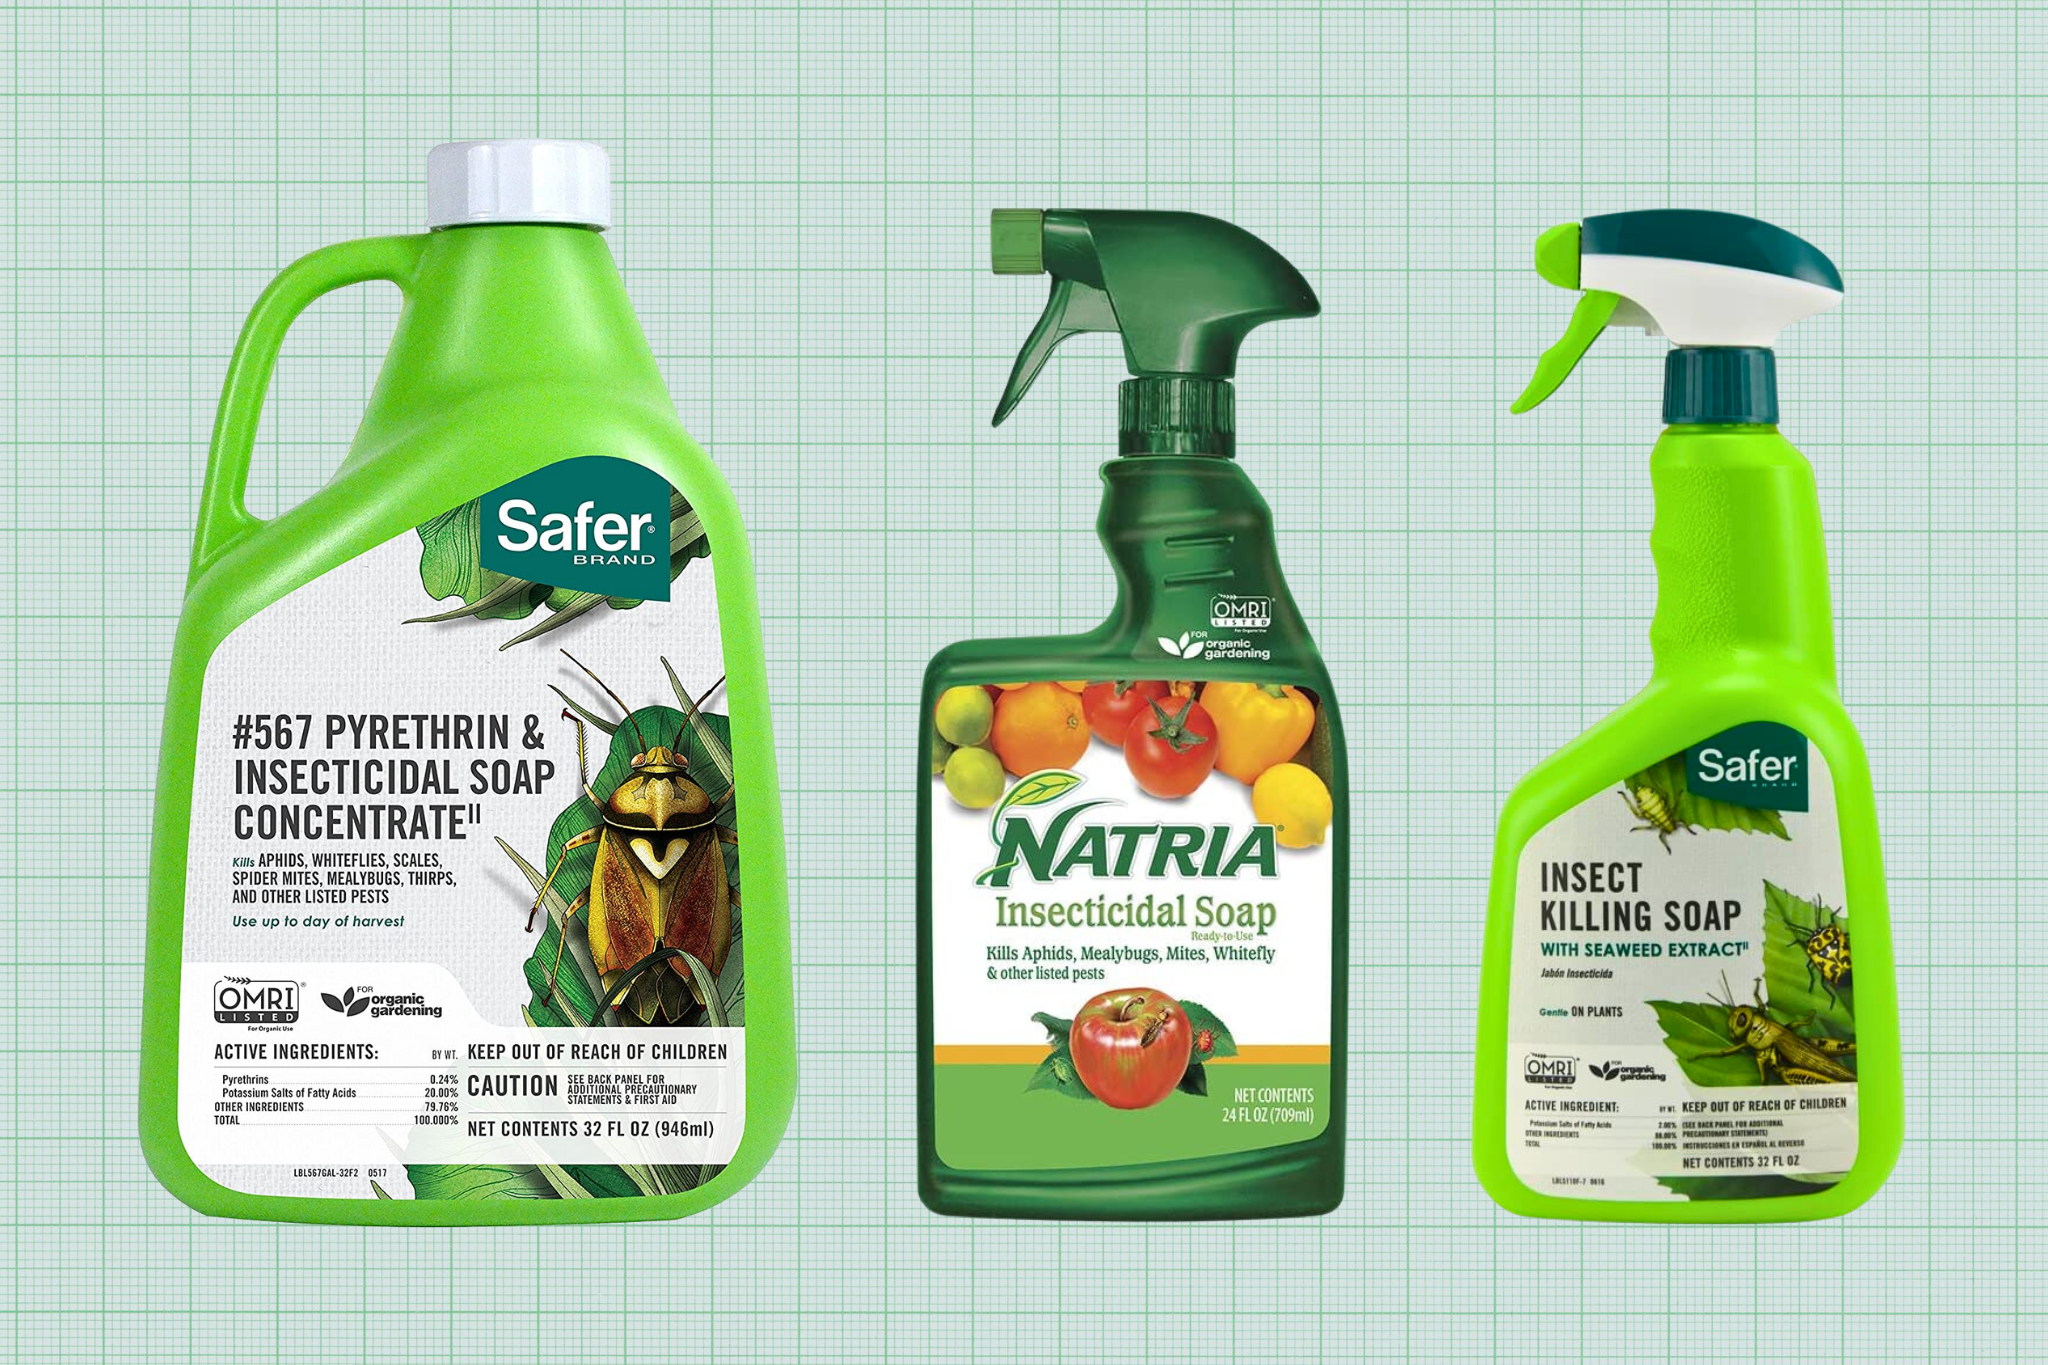 Best Insecticidal Soap guide - lead image, showing Safer Brand Insecticidal Soap and Pyrethrin Concentrate, Natria Insecticidal Soap, and Safer Brand Insect Killing Soap with Seaweed Extract against a green graph paper background.